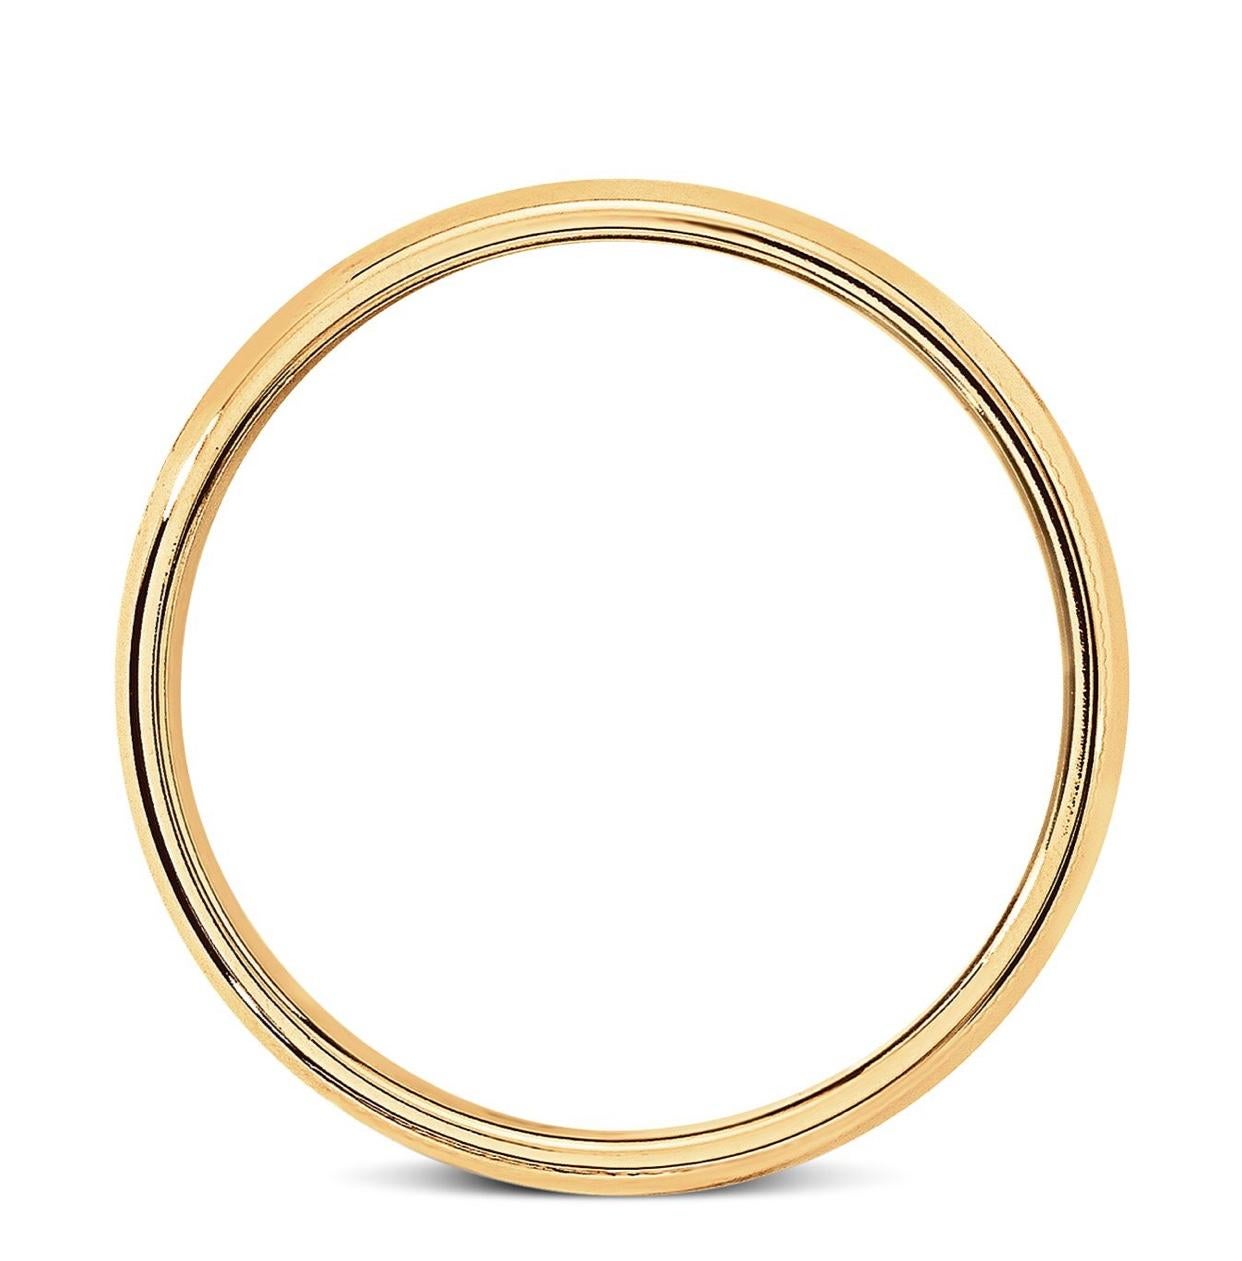 14 Karat Gold  6.5mm Wide Milgrain Half Round Comfort Fit Wedding Band 8.5 Grams
This timeless style adds a Milgrain edge to each side of the classic domed band. Quality craftsmanship makes this long lasting band a great value. 
Milgrain-Edge